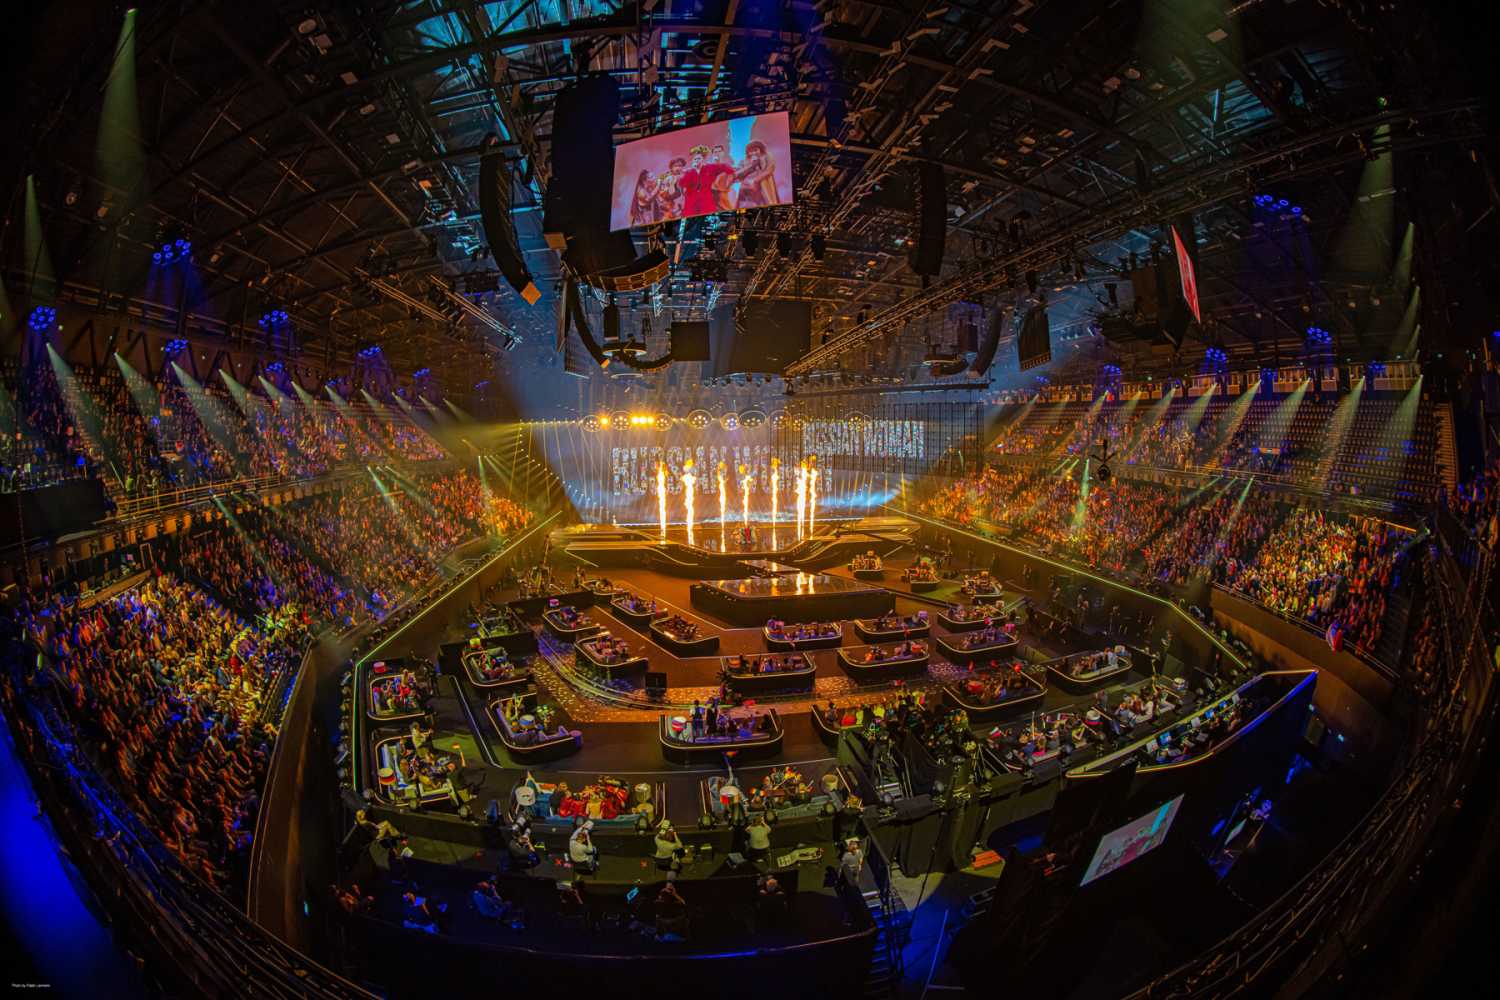 The final of Eurovision Song Contest featured over 300 L-Acoustics K and X Series loudspeakers (photo: Ralph Larman)